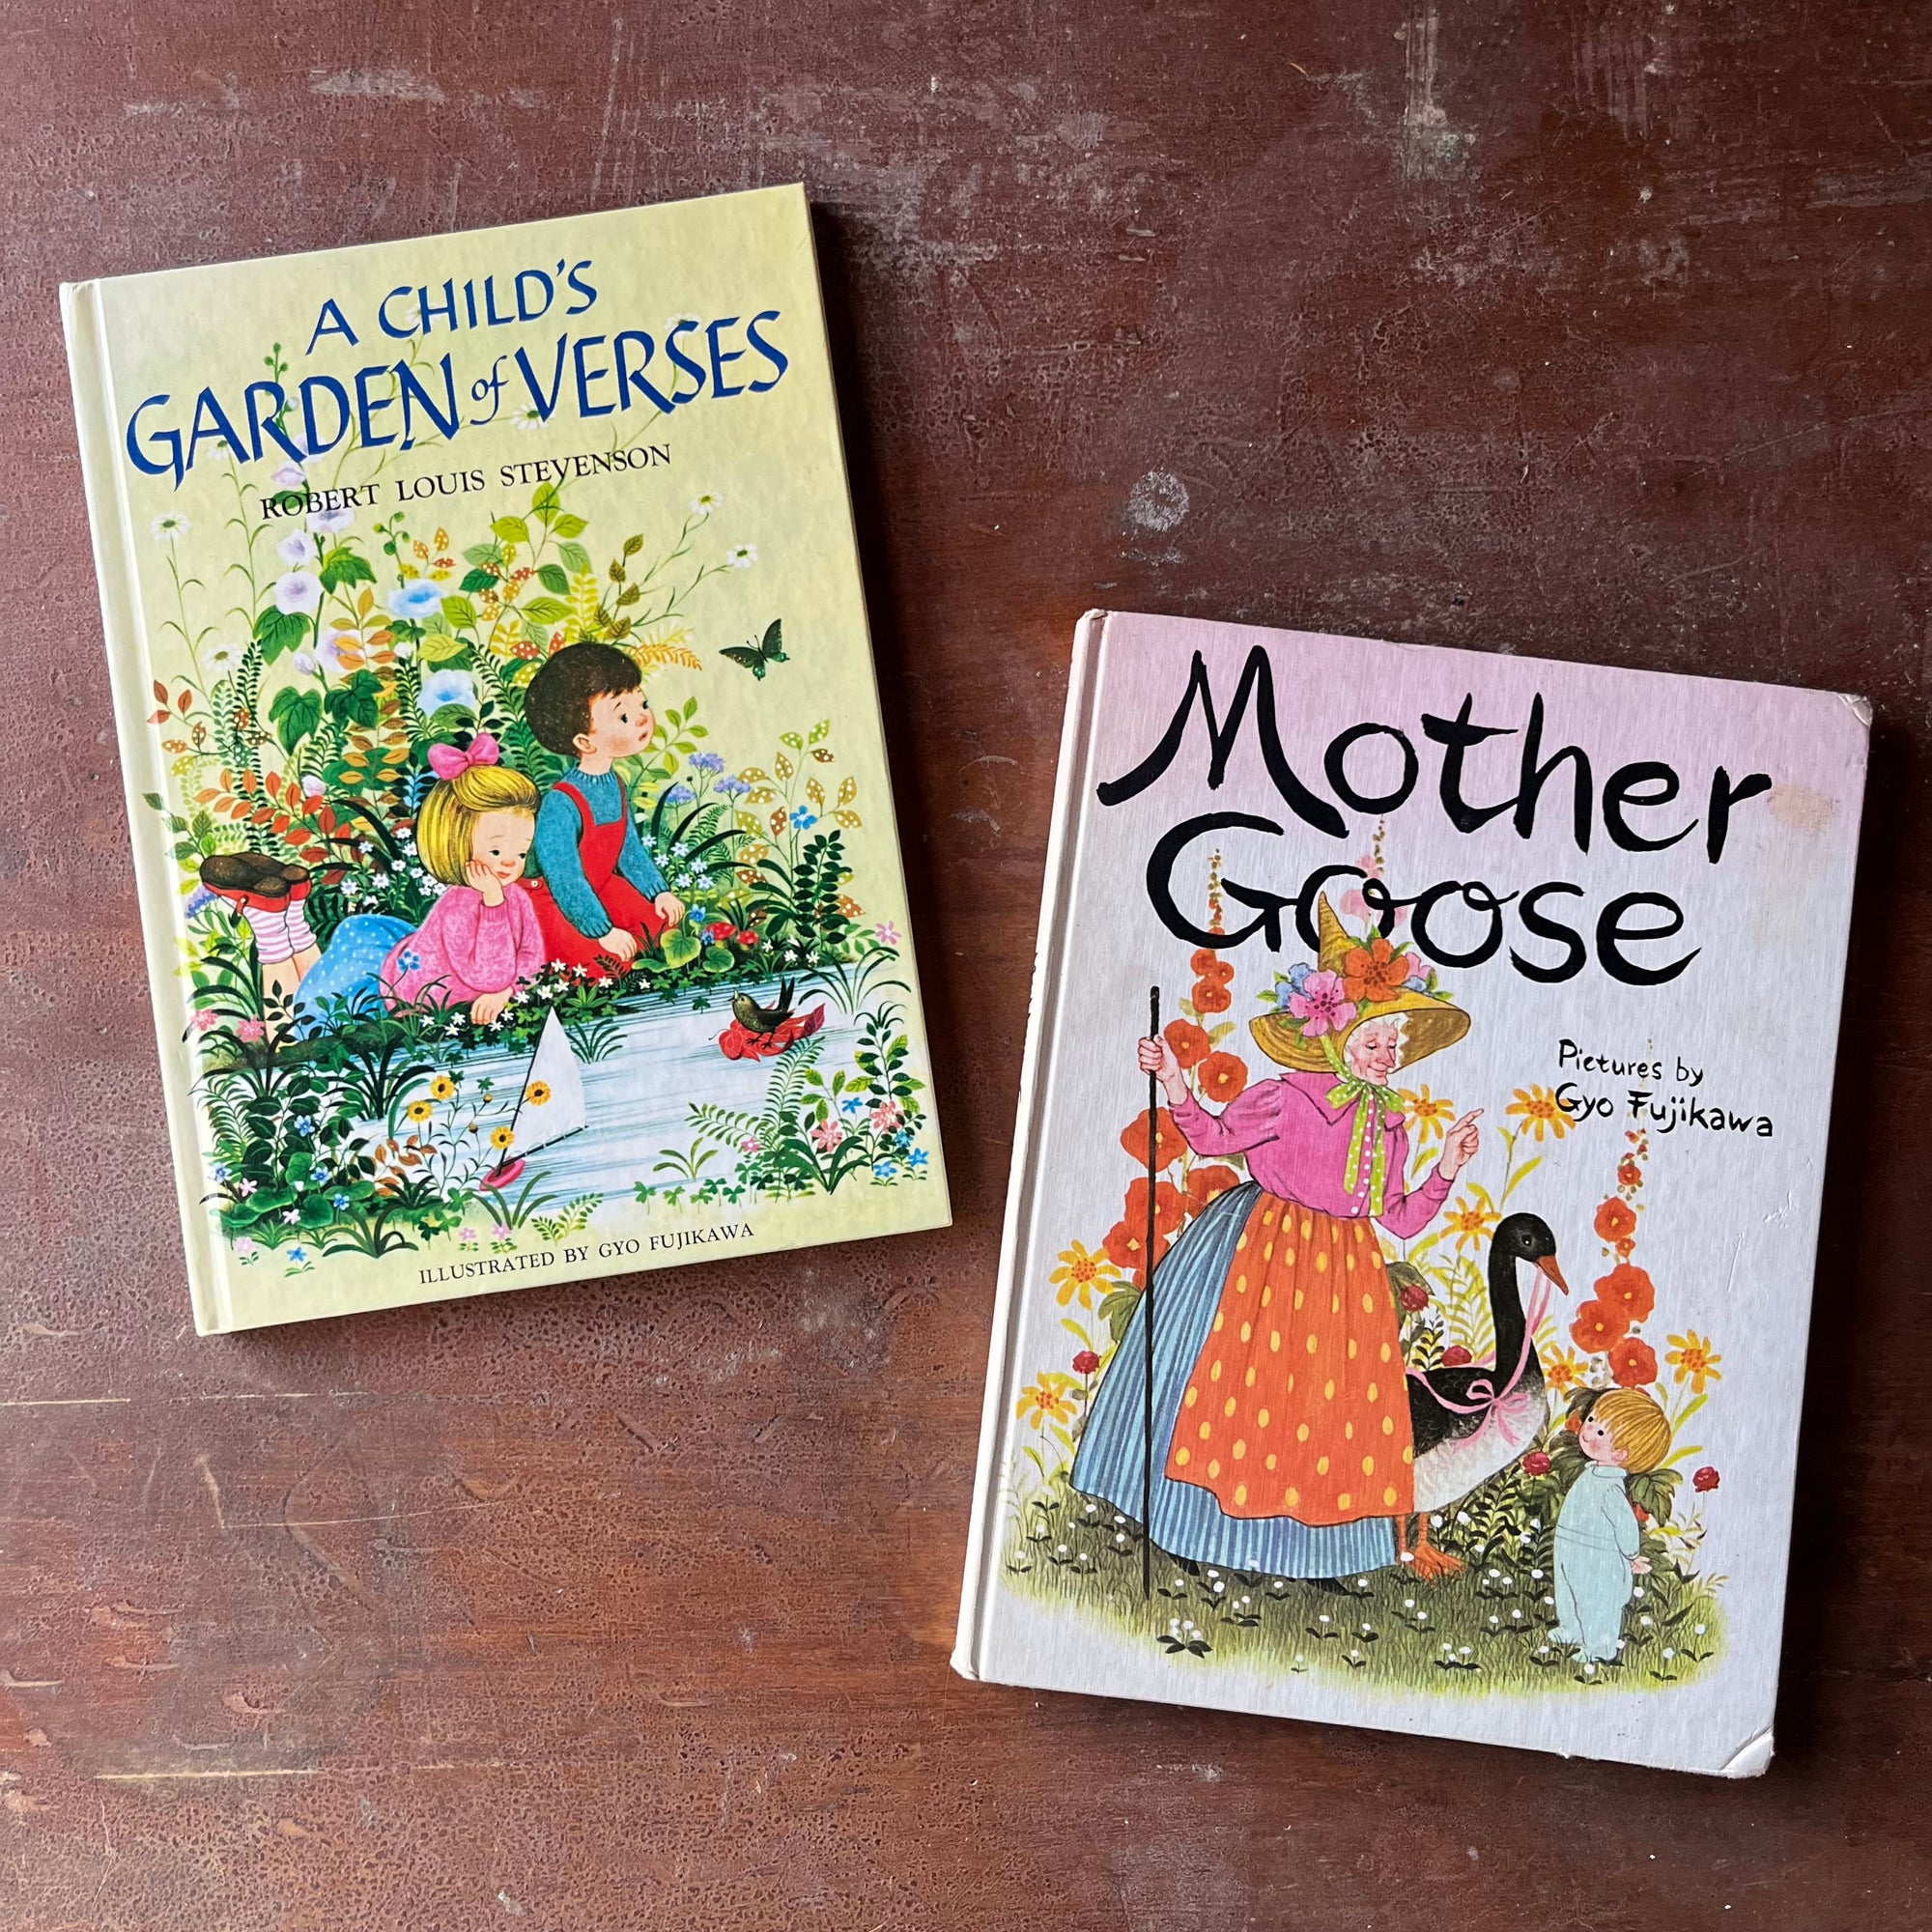 A Child's Garden of Verses written by Robert Louis Stevenson & Mother Goose Nursery Rhymes-both illustrated by Gyo Fujikawa-vintage children's books-view of the front covers with illustrations by Gyo Fujikawa on each